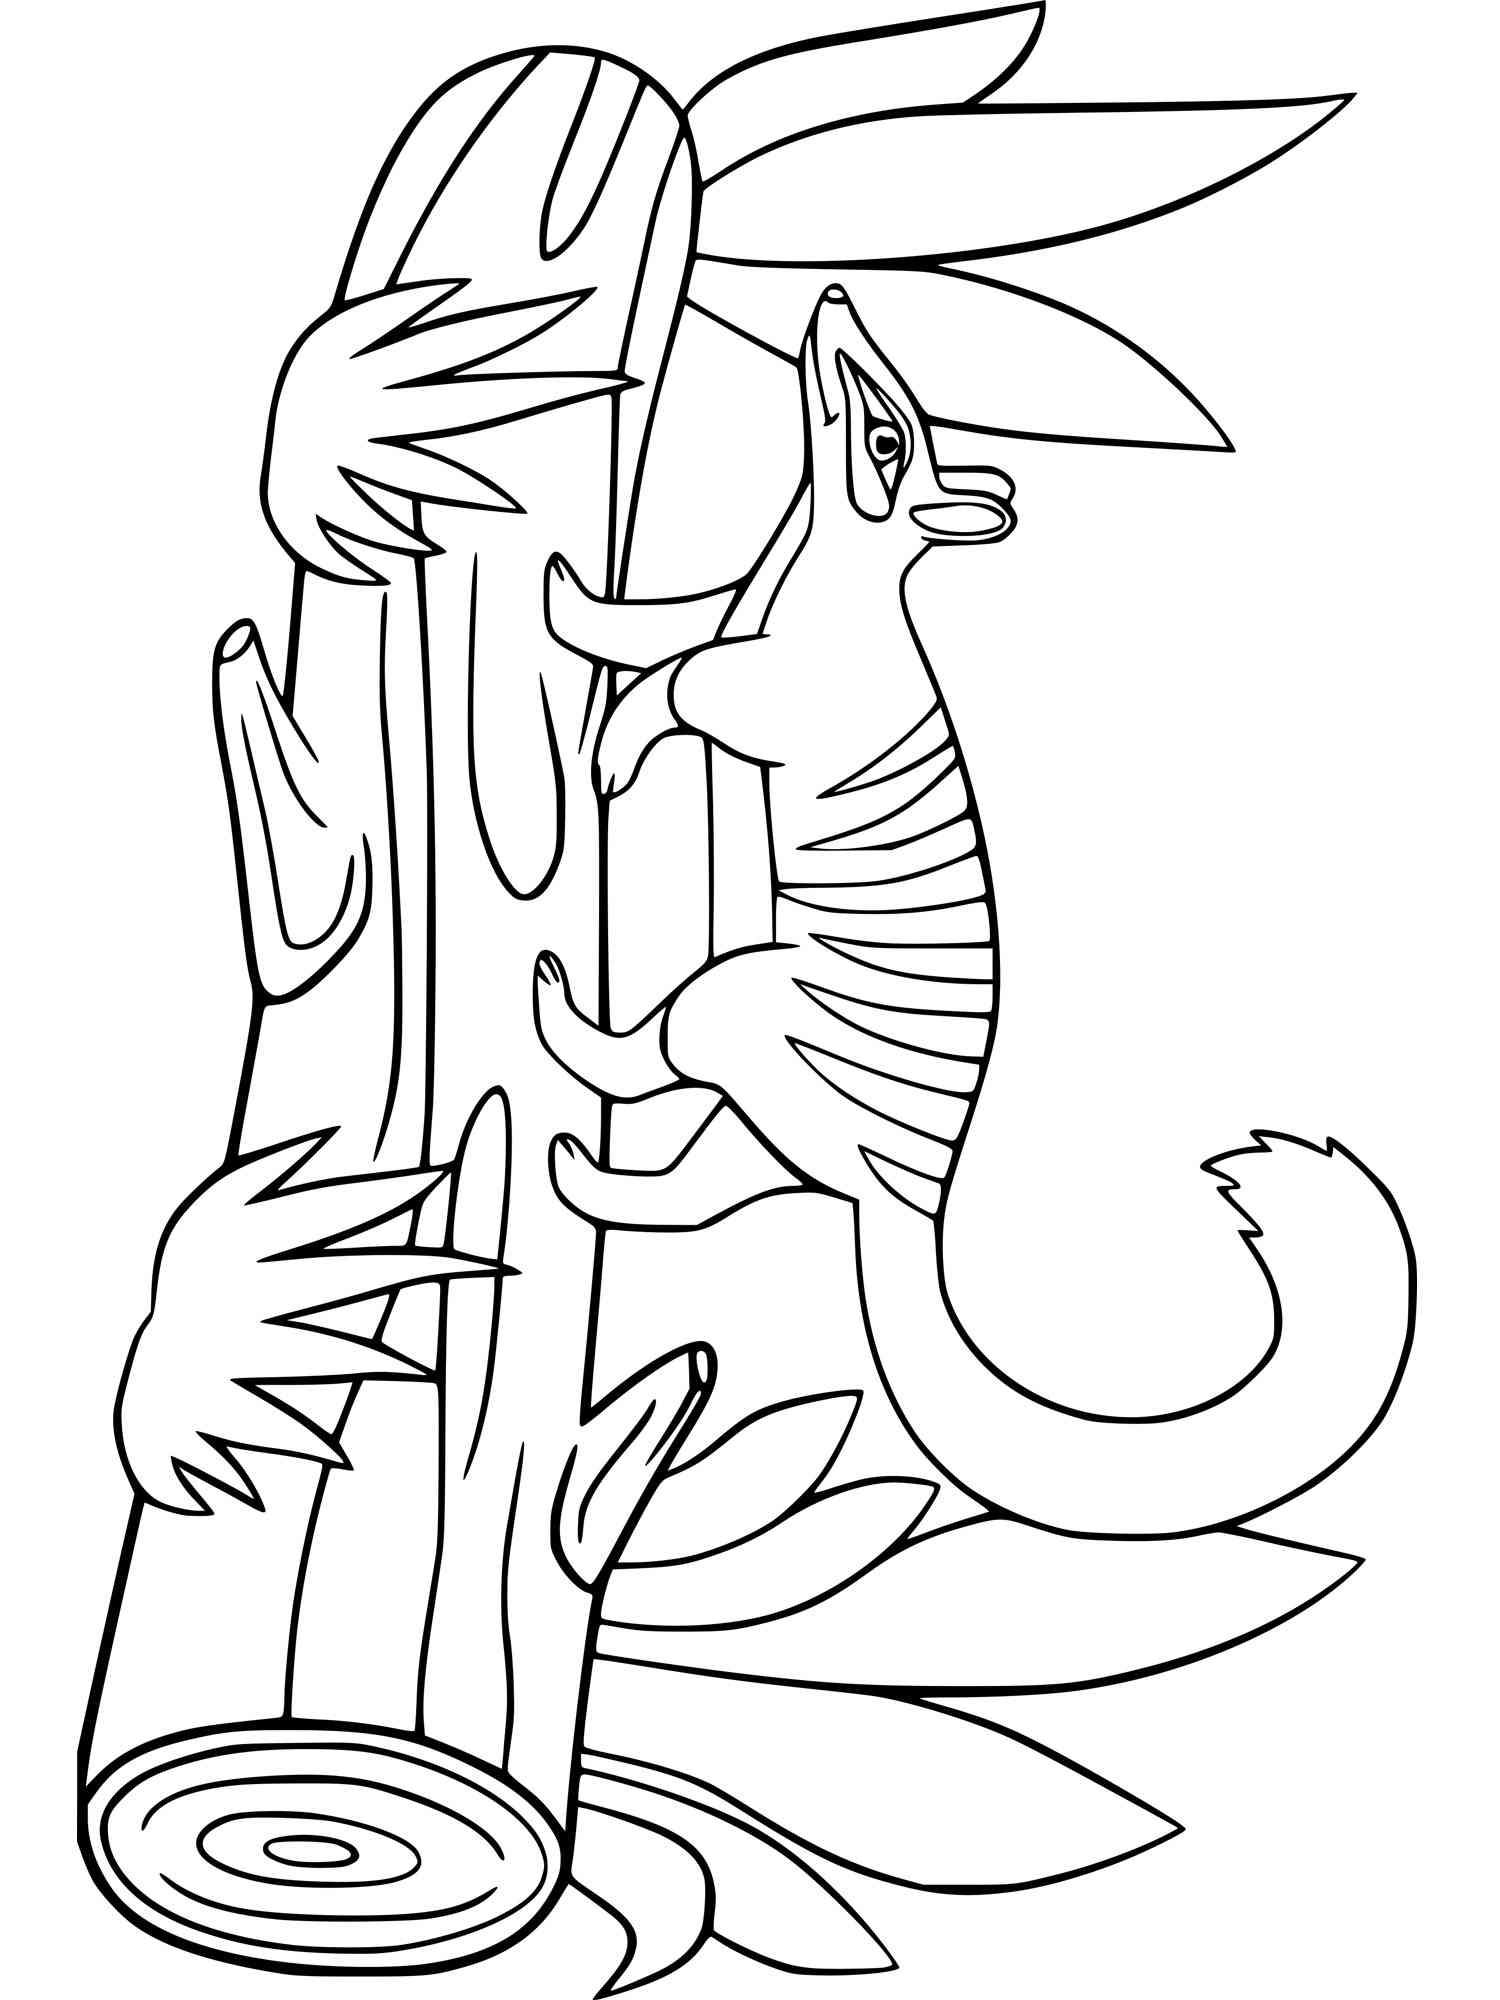 Numbat on a log coloring page